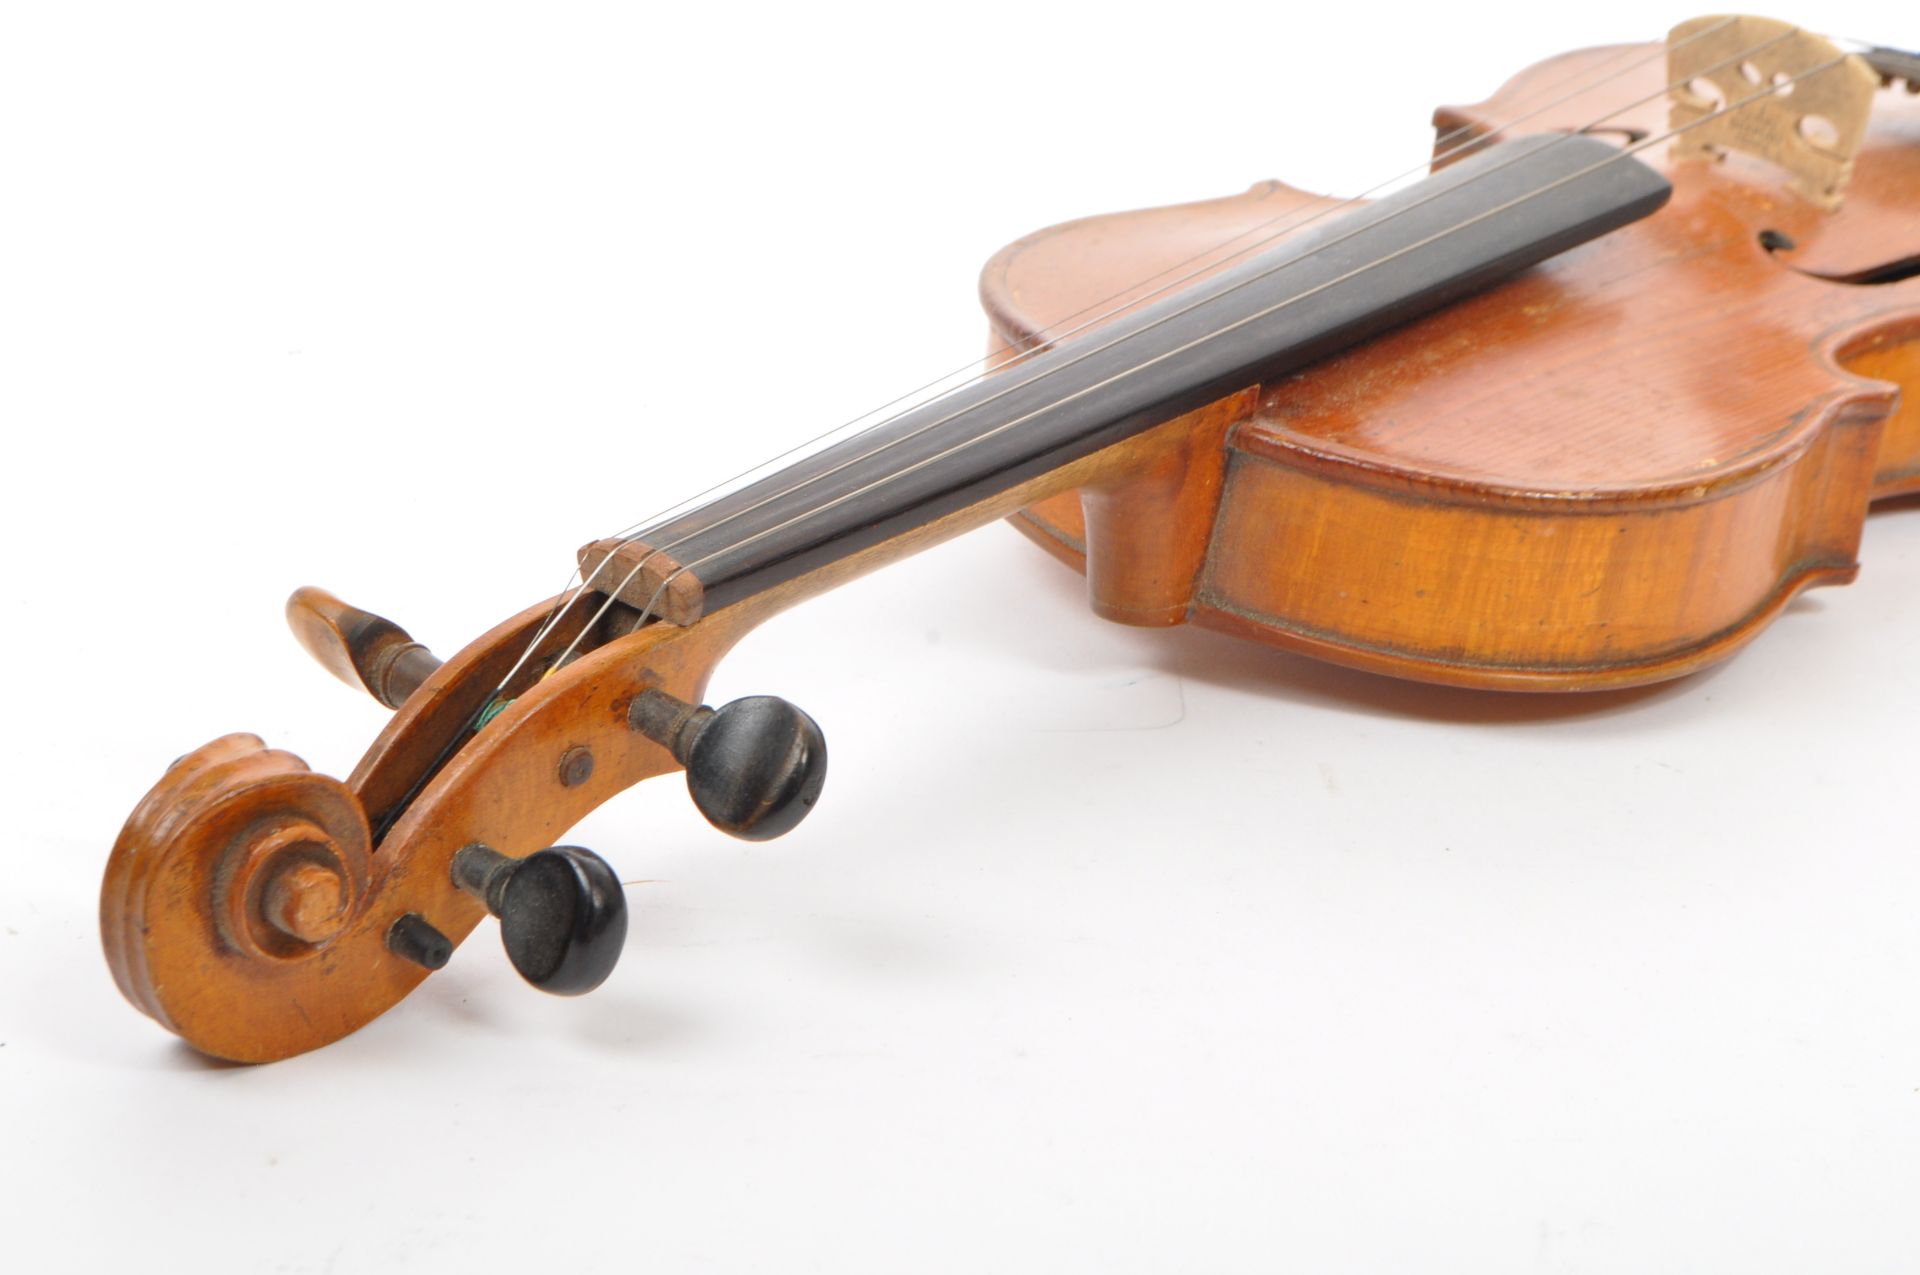 LATE 19TH CENTURY TWO PIECE BACK VIOLIN 3/4 SIZE WITH BOW - Image 5 of 6